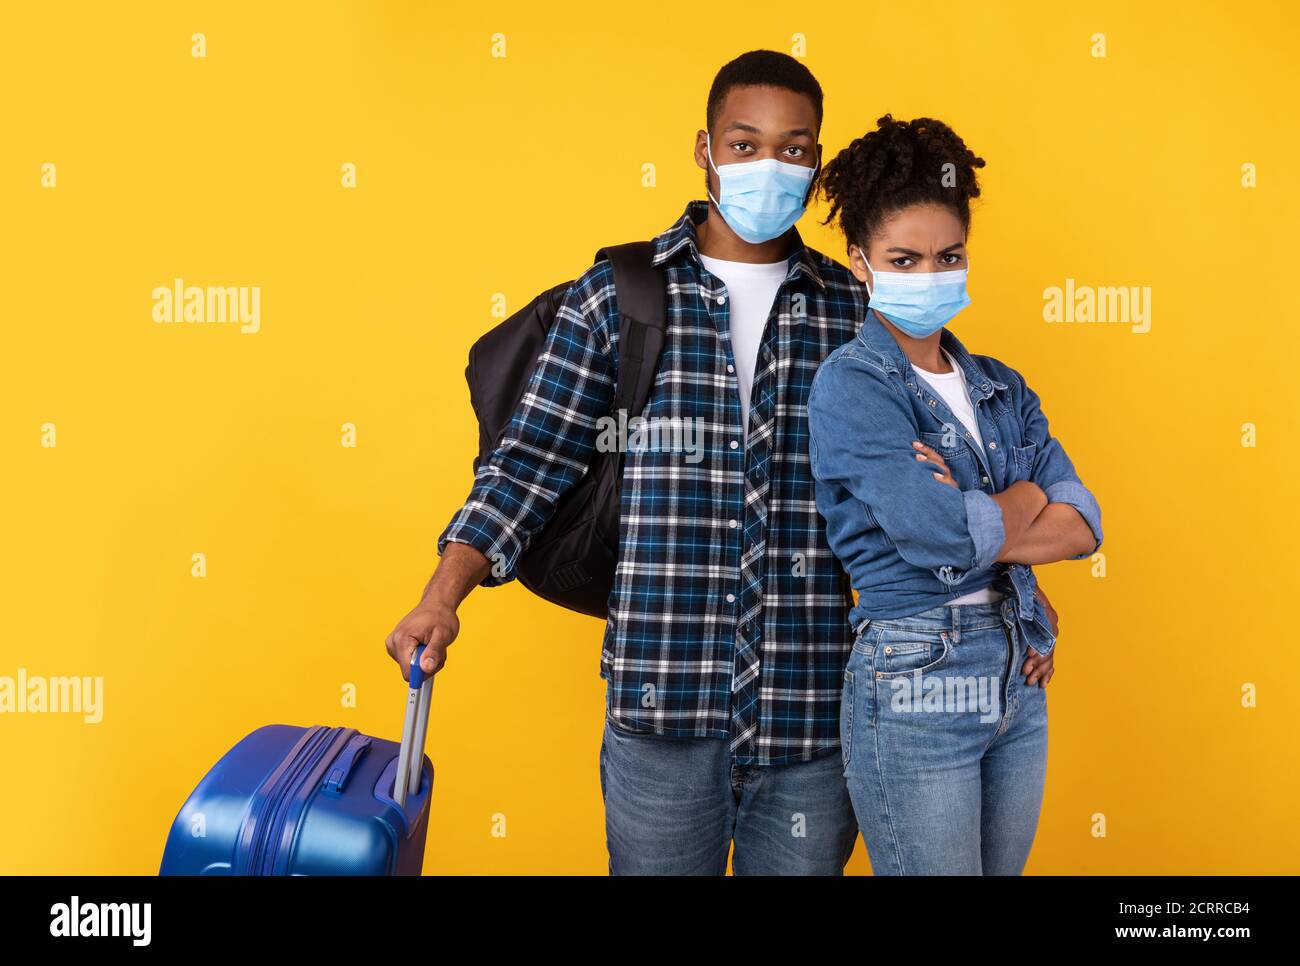 Black Tourists Wearing Medical Masks Standing With Luggage, Yellow Background Stock Photo